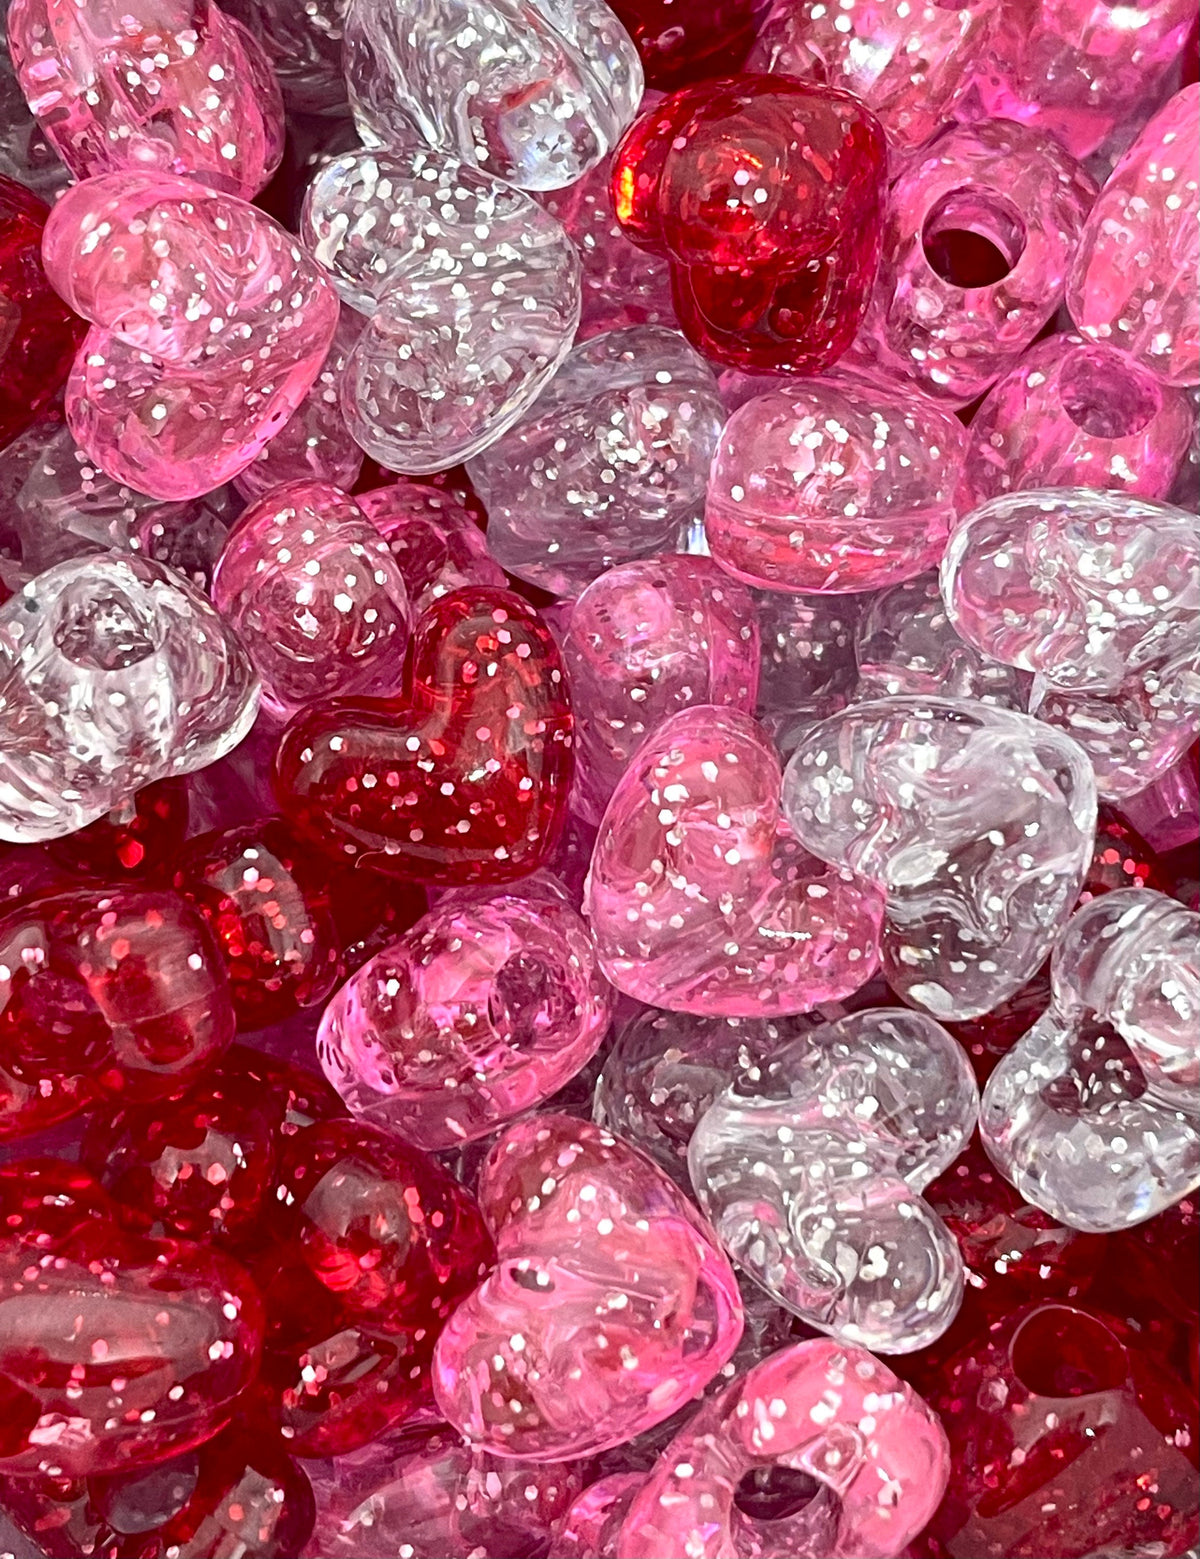 Red Heart Valentine's Day Beads for Your Sweetheart